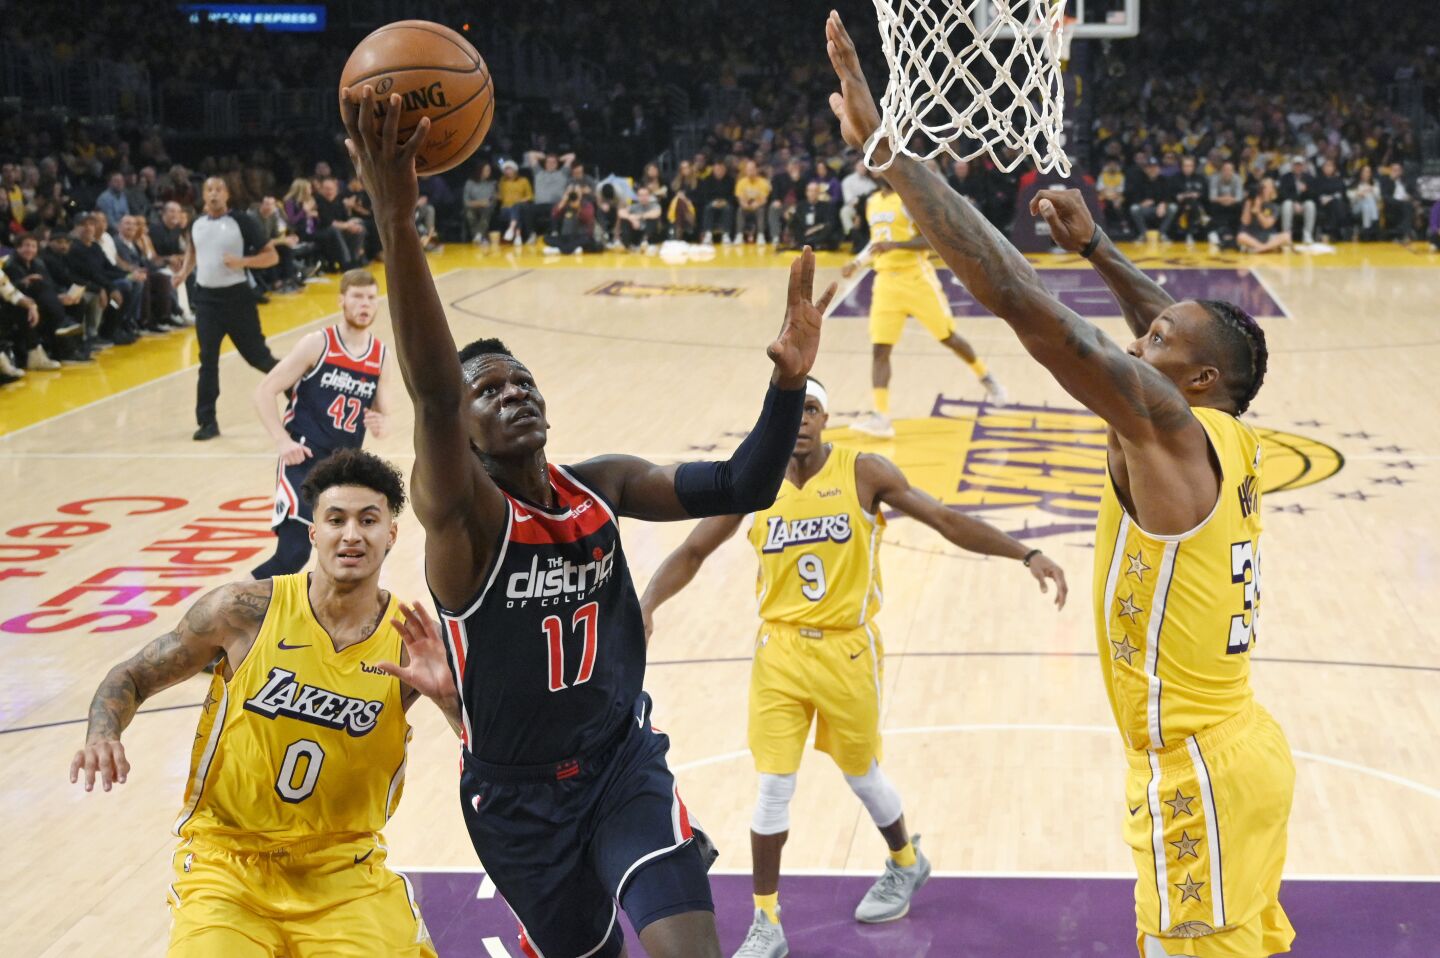 Wizards guard Isaac Bonga (17) puts up a shot during a game Nov. 29 against the Lakers at Staples Center.